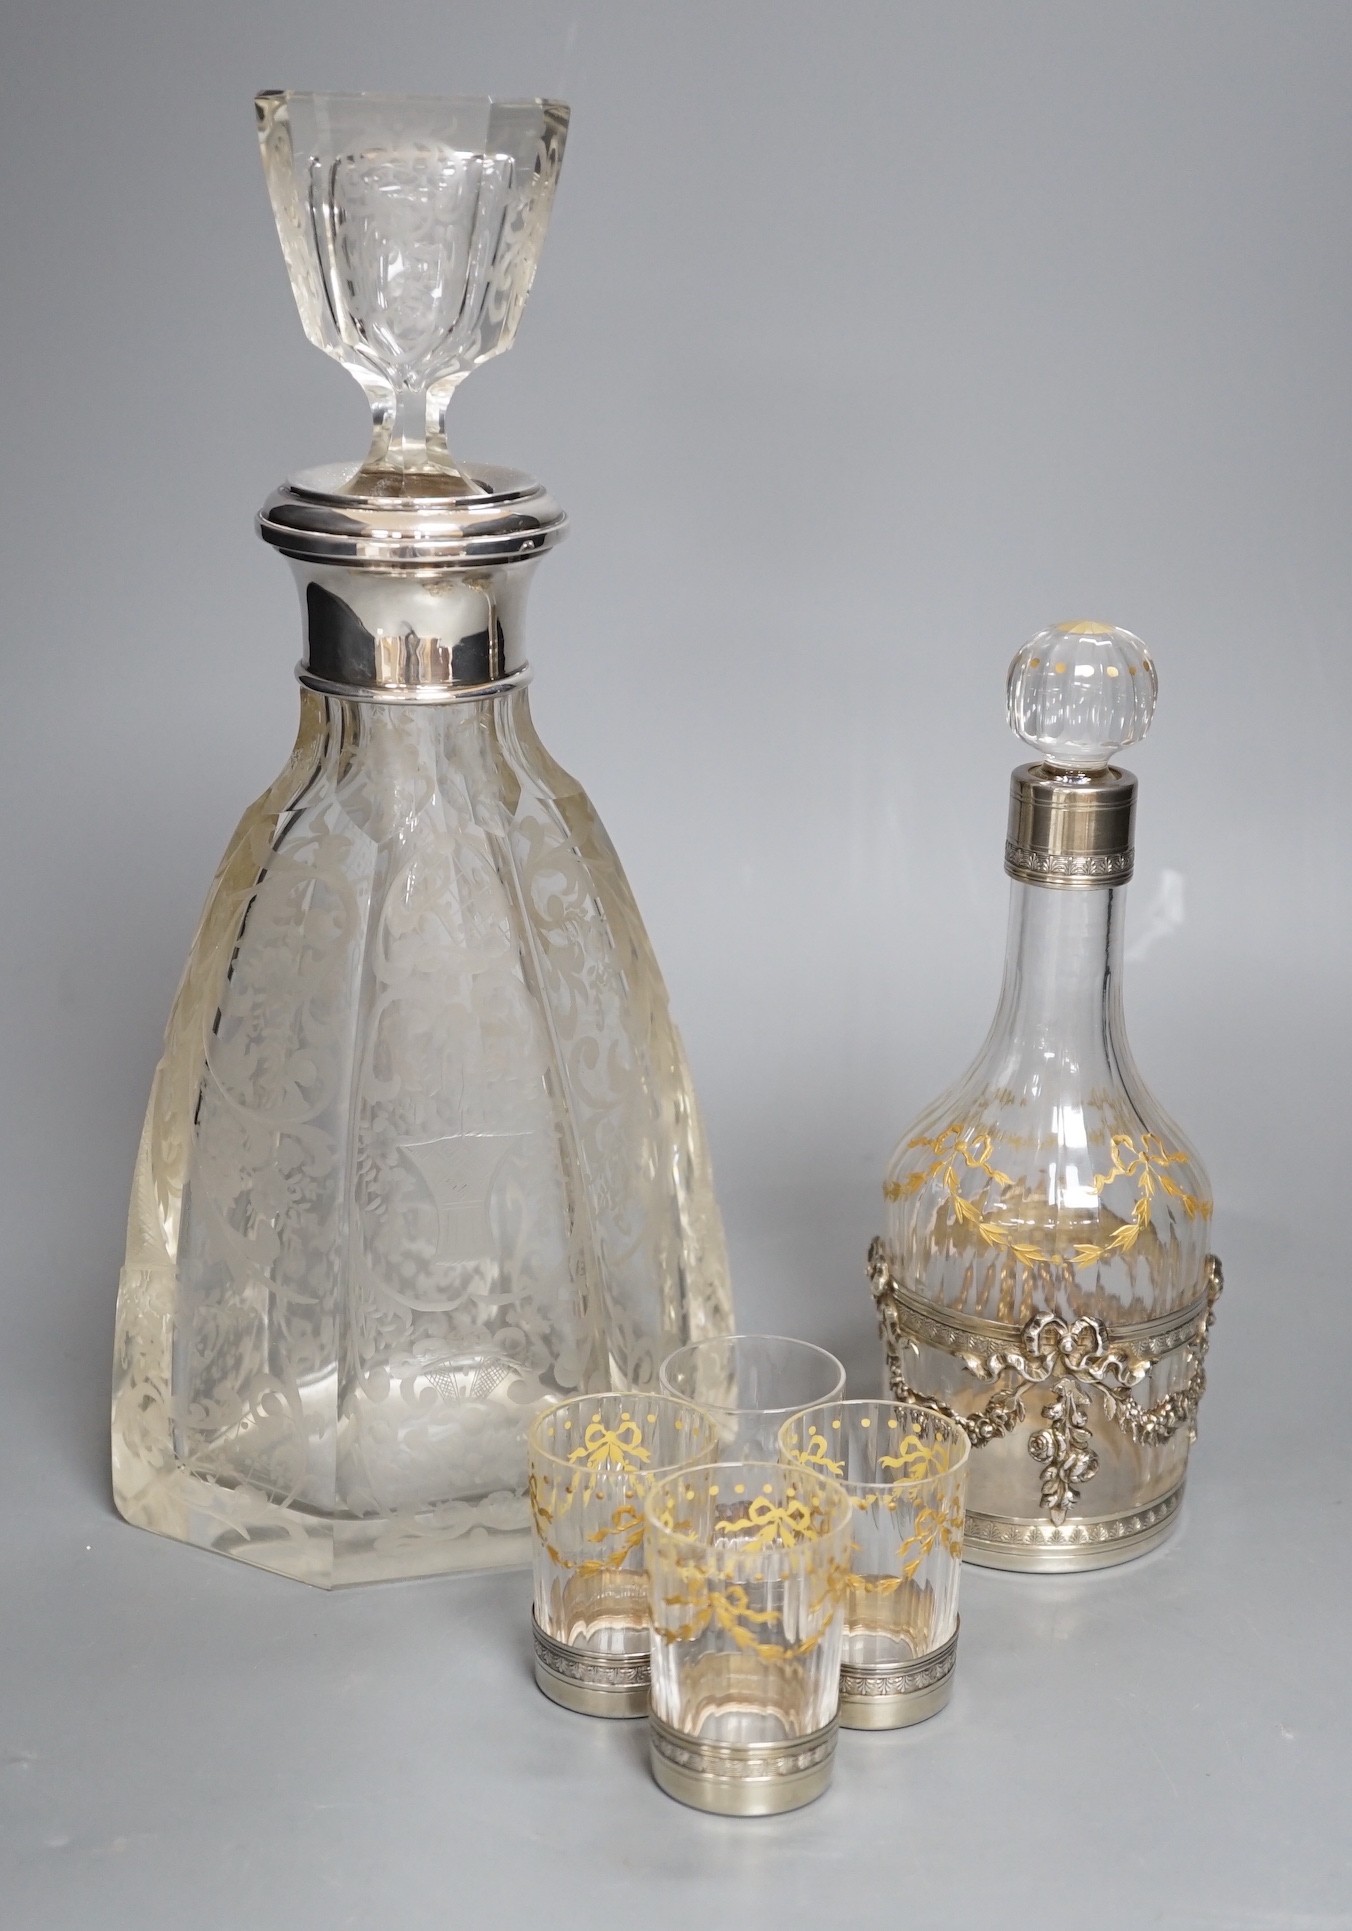 An early 20th century French white metal mounted gilded glass decanter and stopper and four matching tots, decanter height 19.7cm, and a French white metal collared etched glass decanter and stopper.